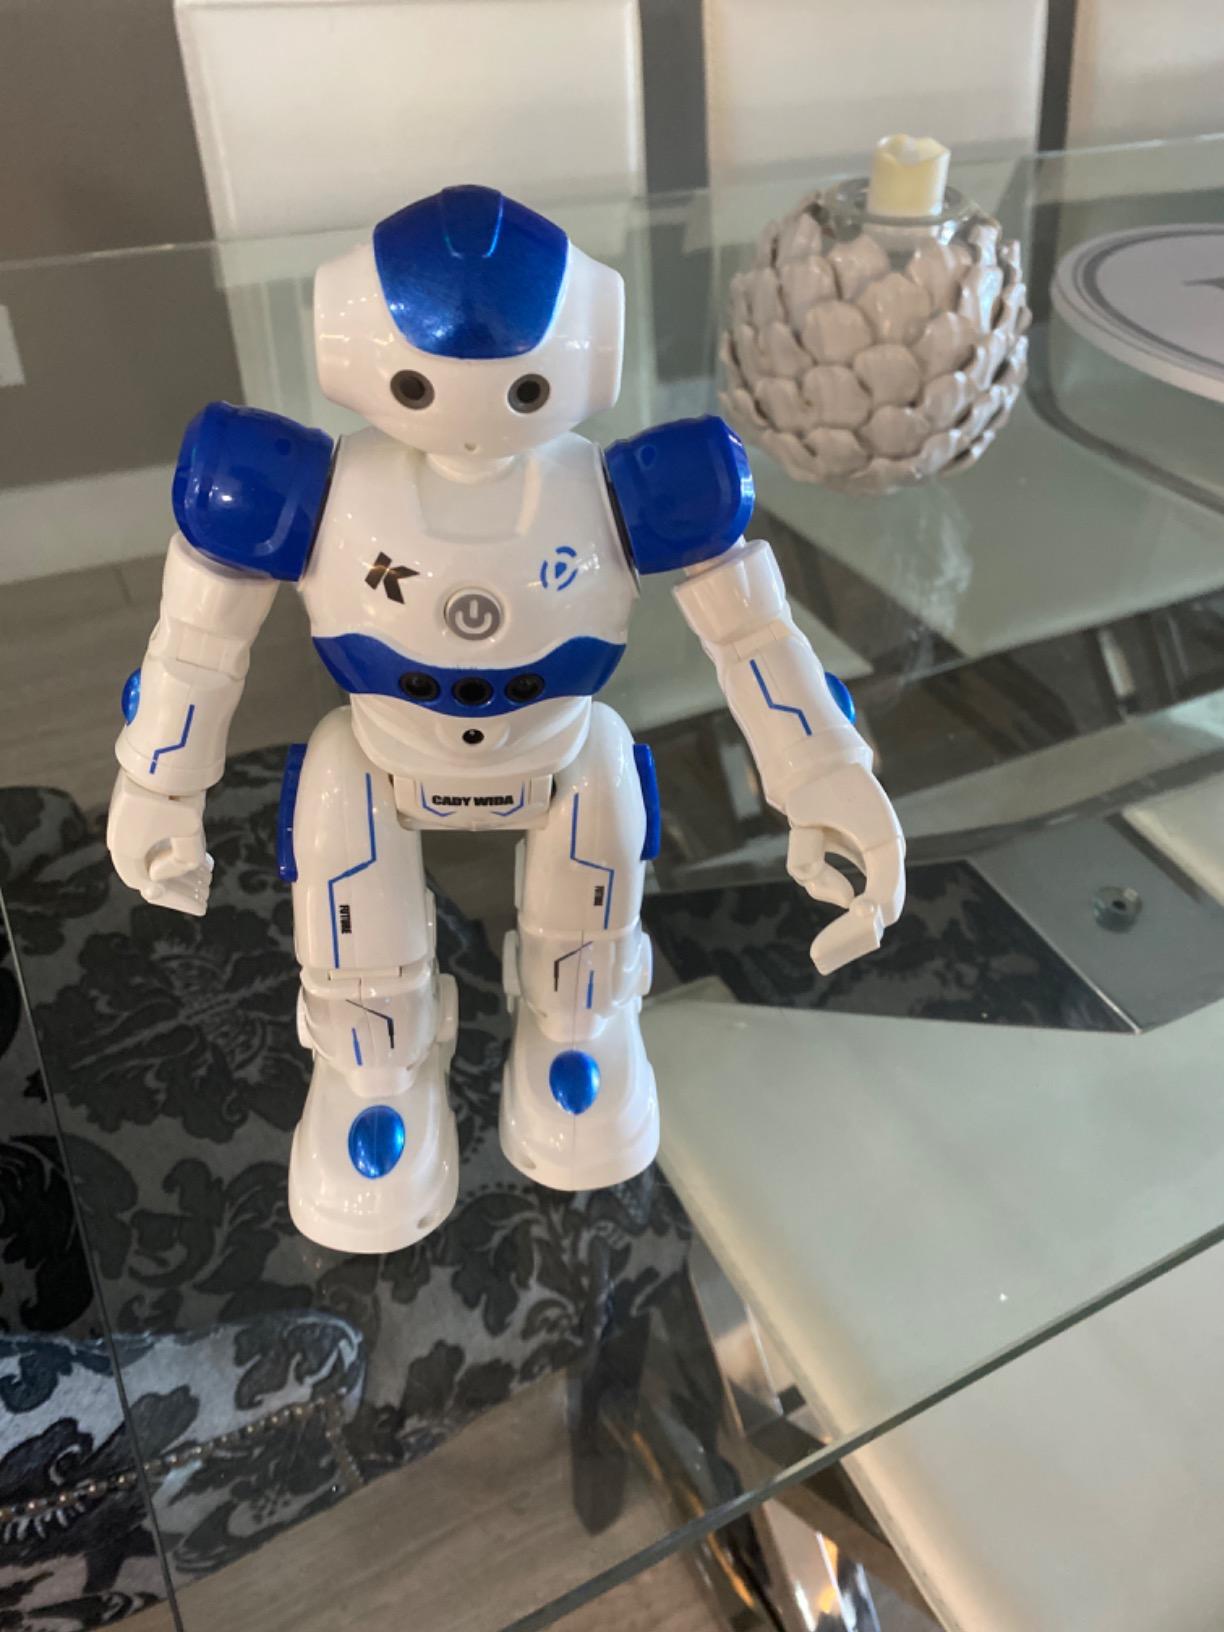 RC Robot Toy - Rechargeable, Hand Gesture Sensing, and More